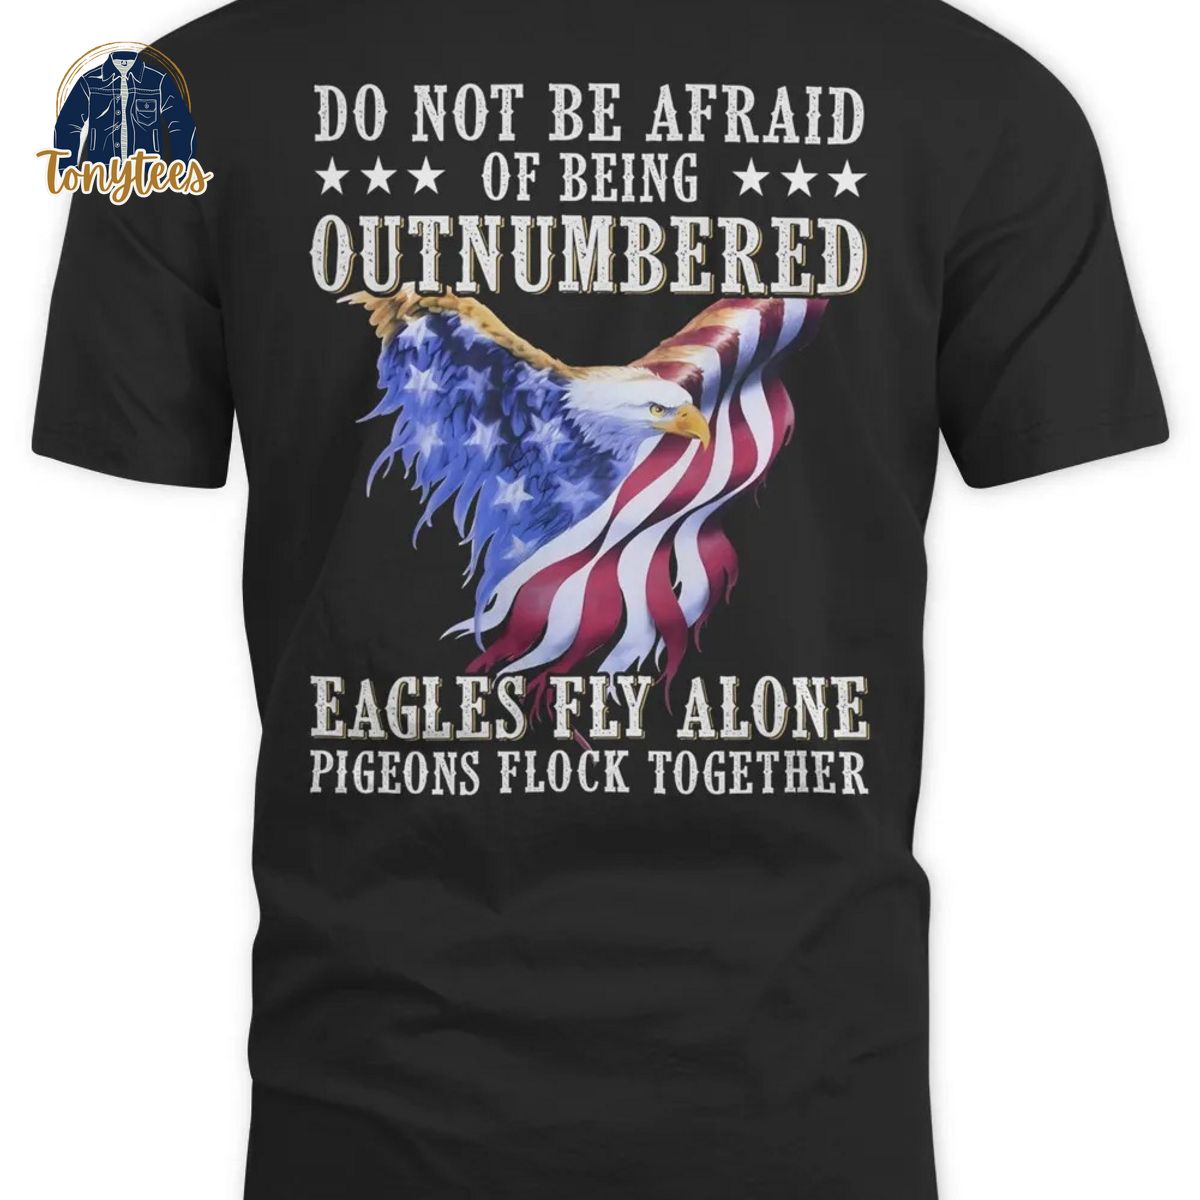 Do not be afraid of being outnumbered Eagles fly alone pigeons flock together shirt